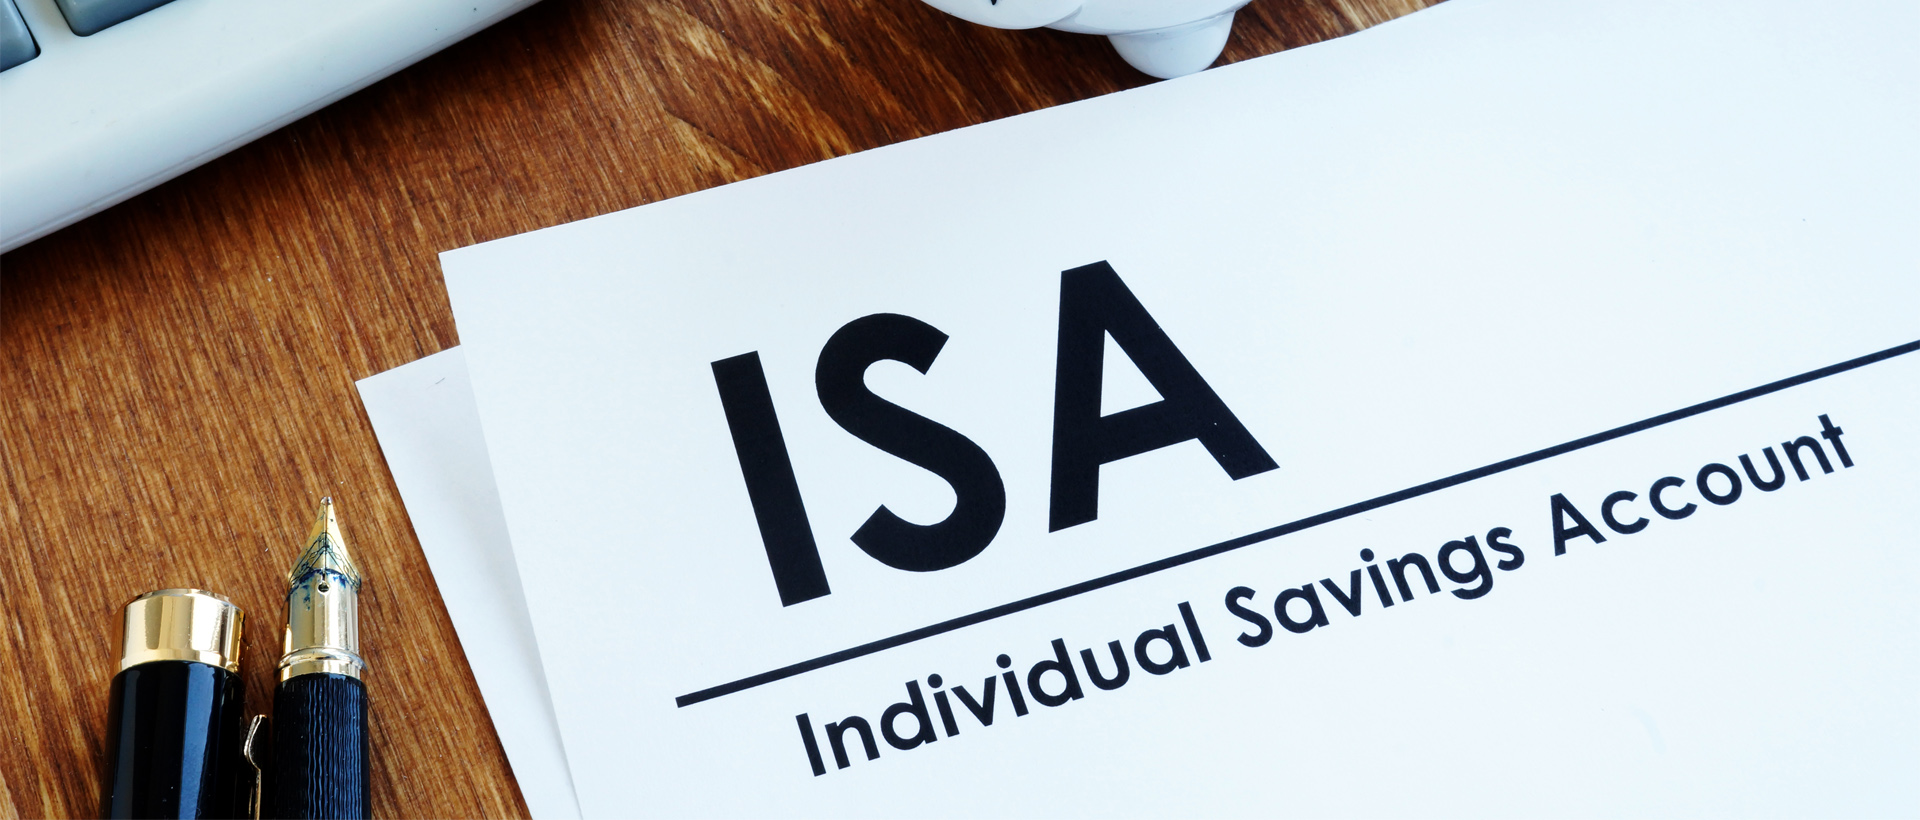 Use of ISA Allowances Before end of Tax Year